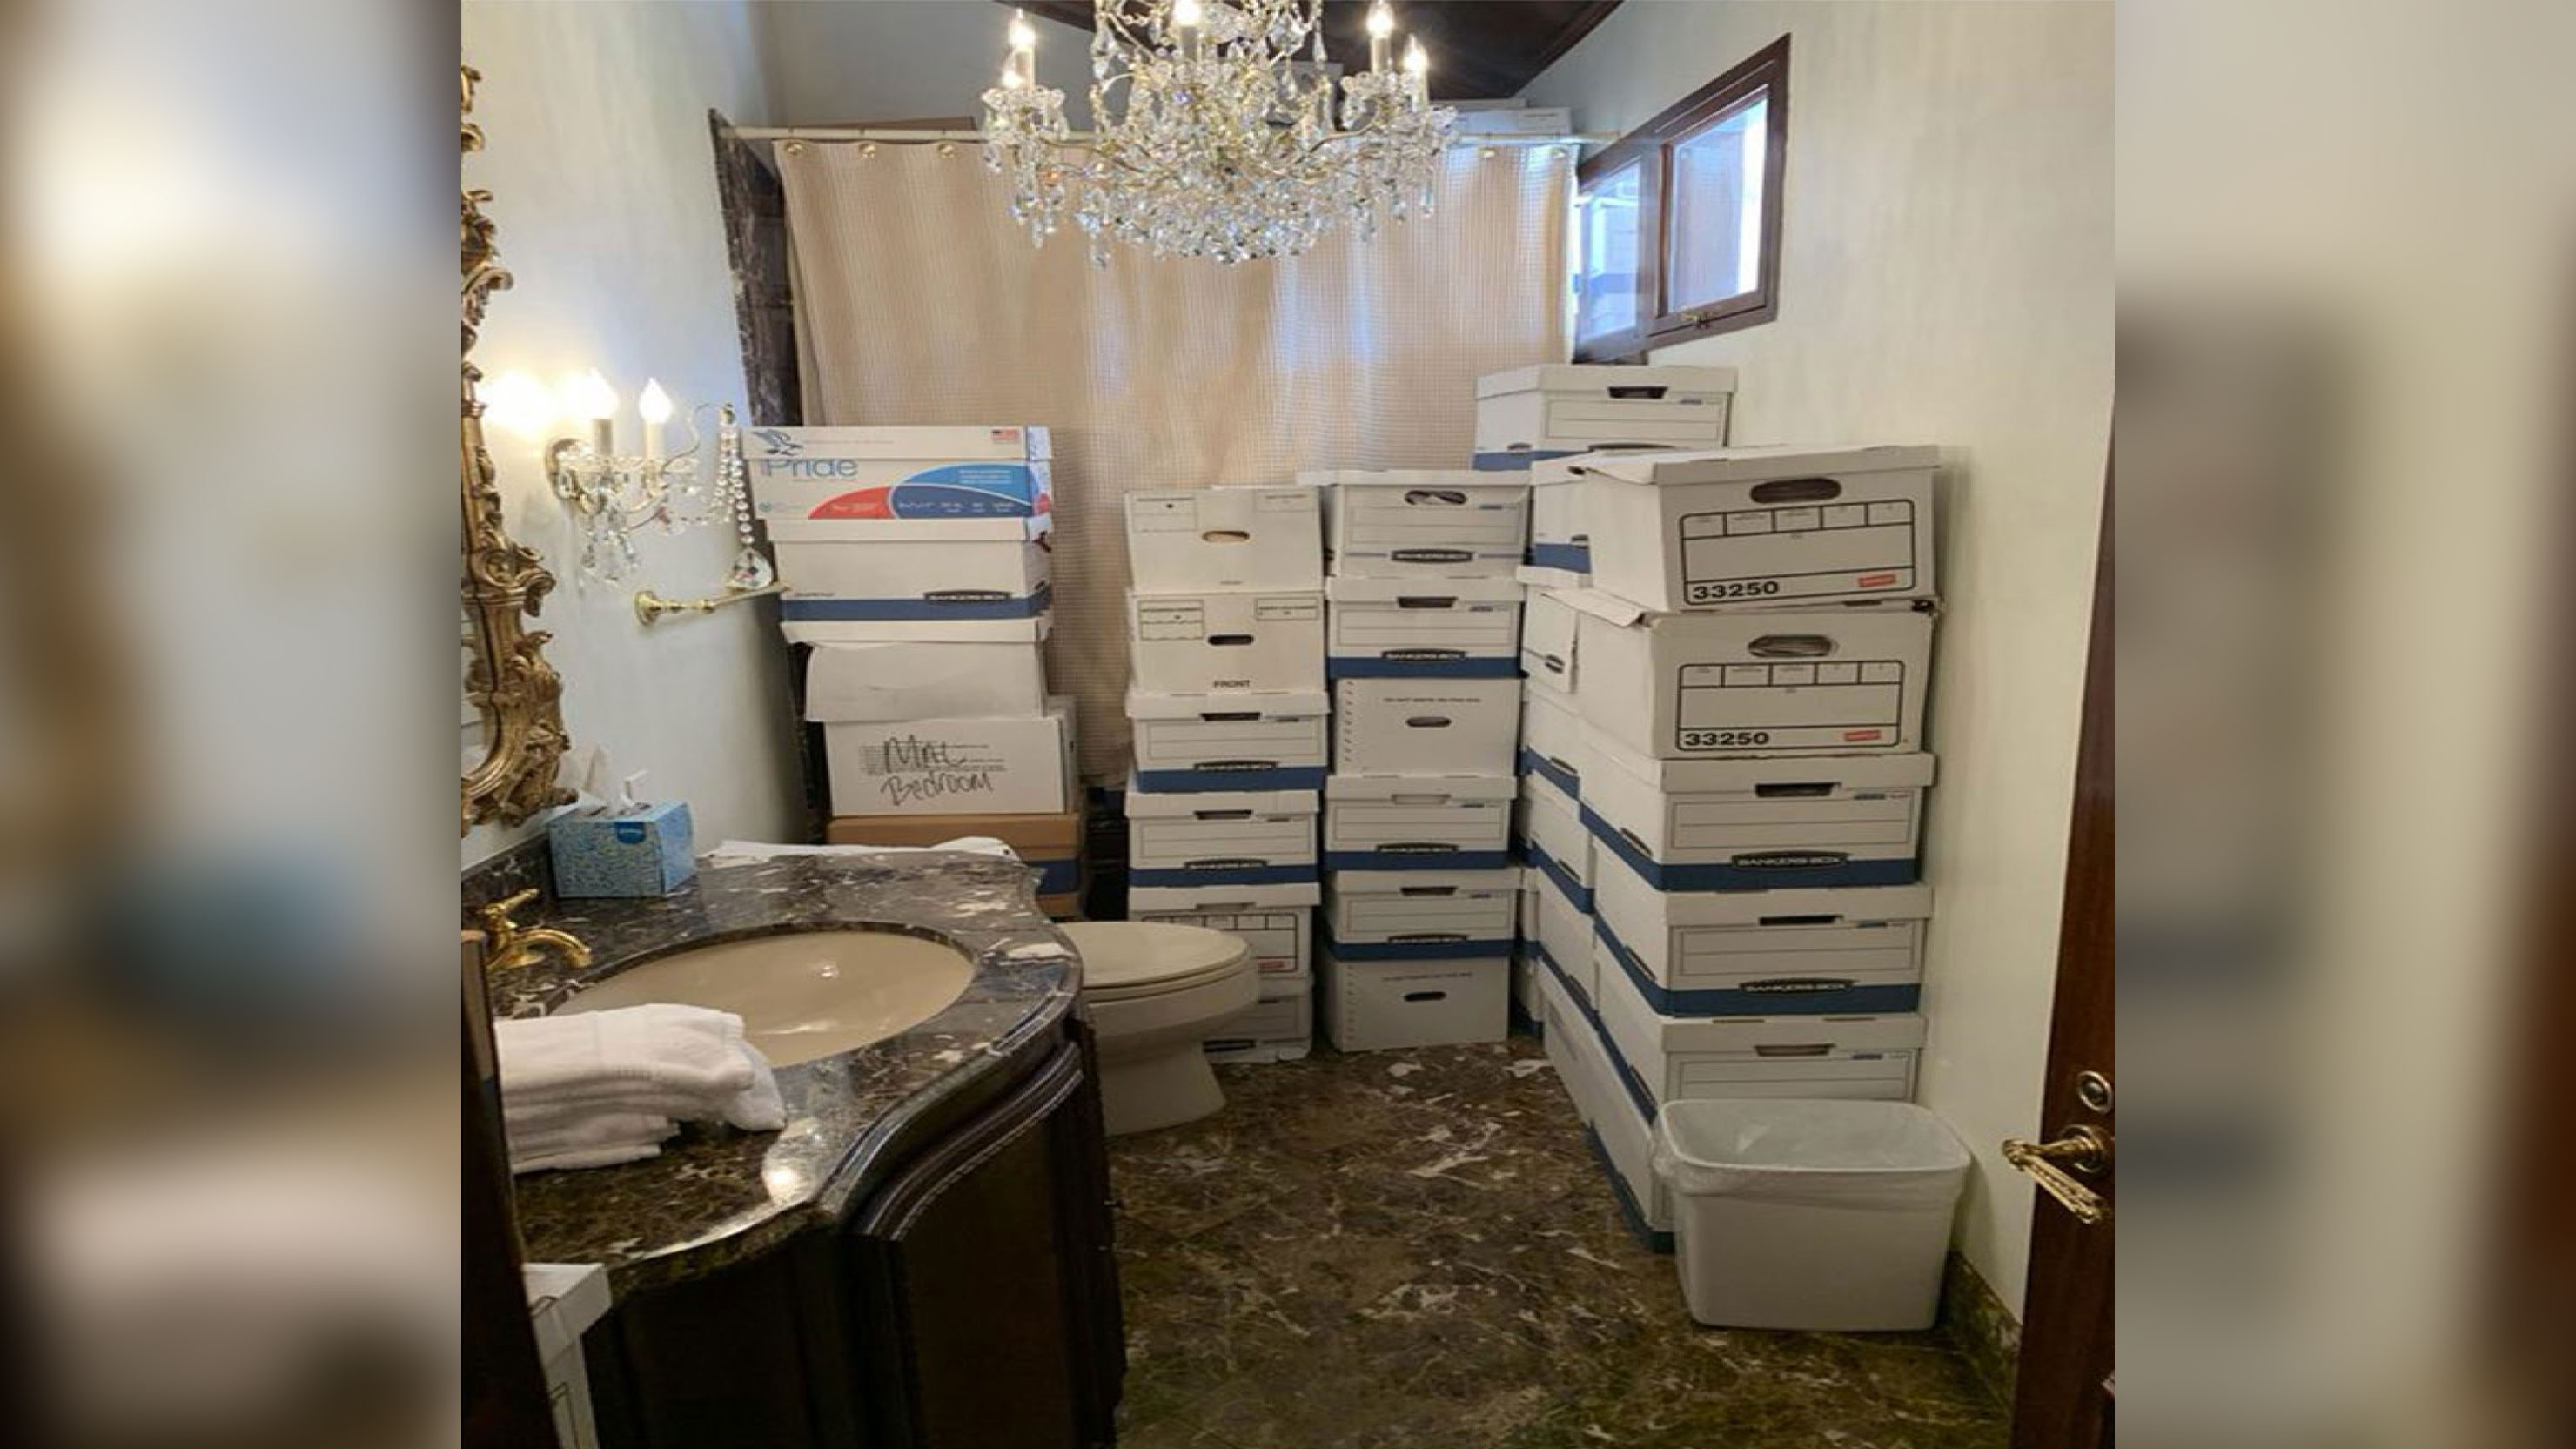 Boxes of classified documents are stored inside a bathroom inside the Mar-a-Lago Club's Lake Room.